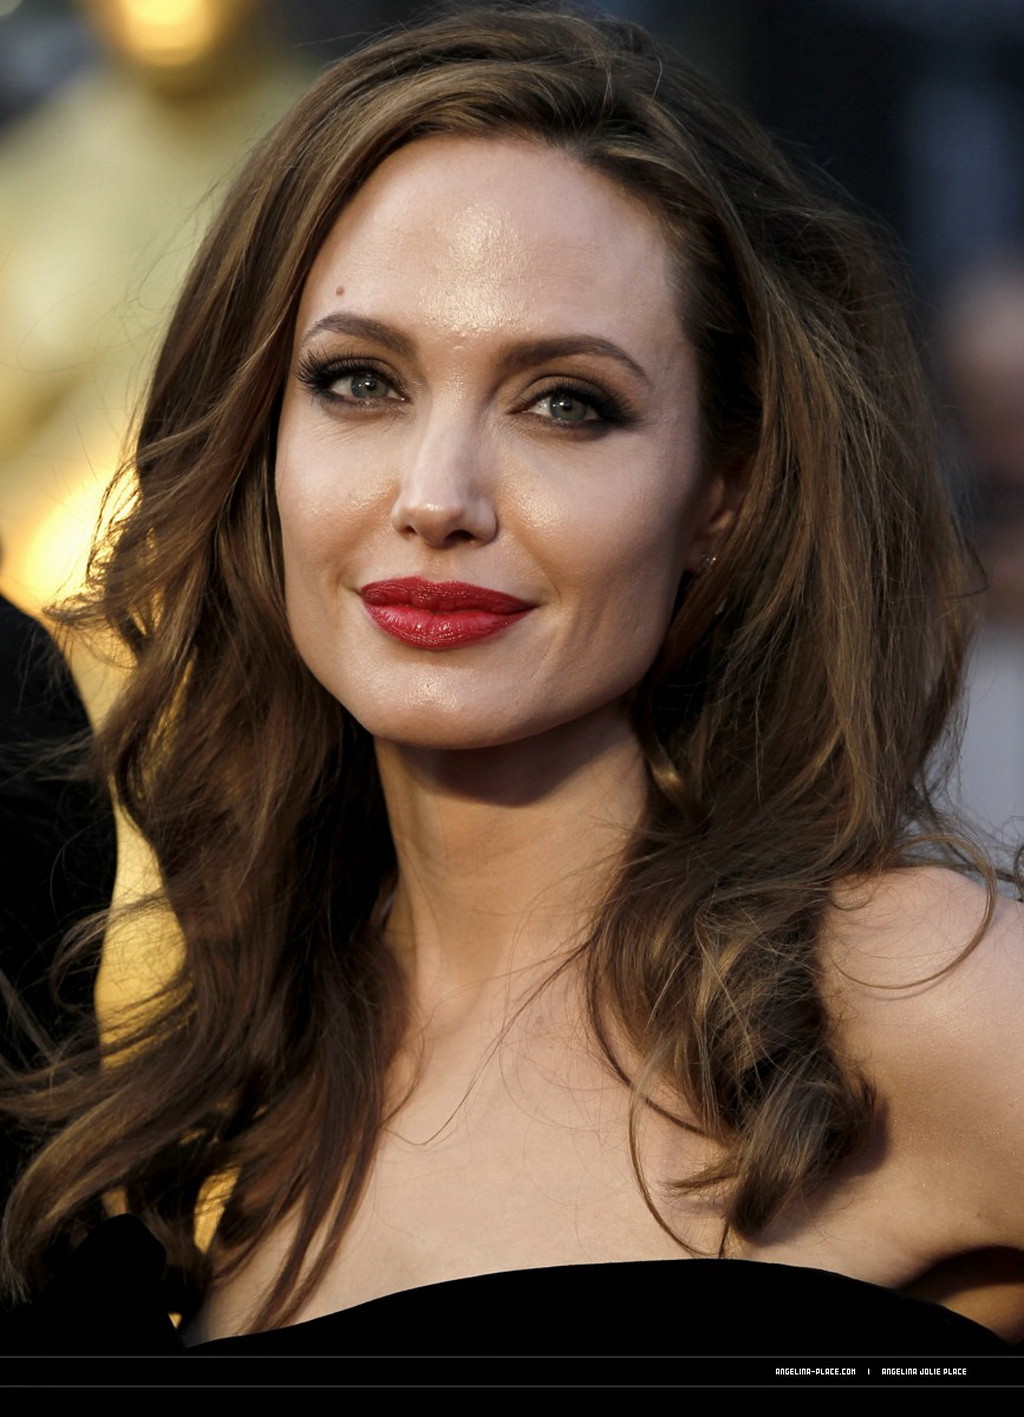 Angelina Jolie looking incredibly alluring and leggy at 84th Academy Awards phot #75272566